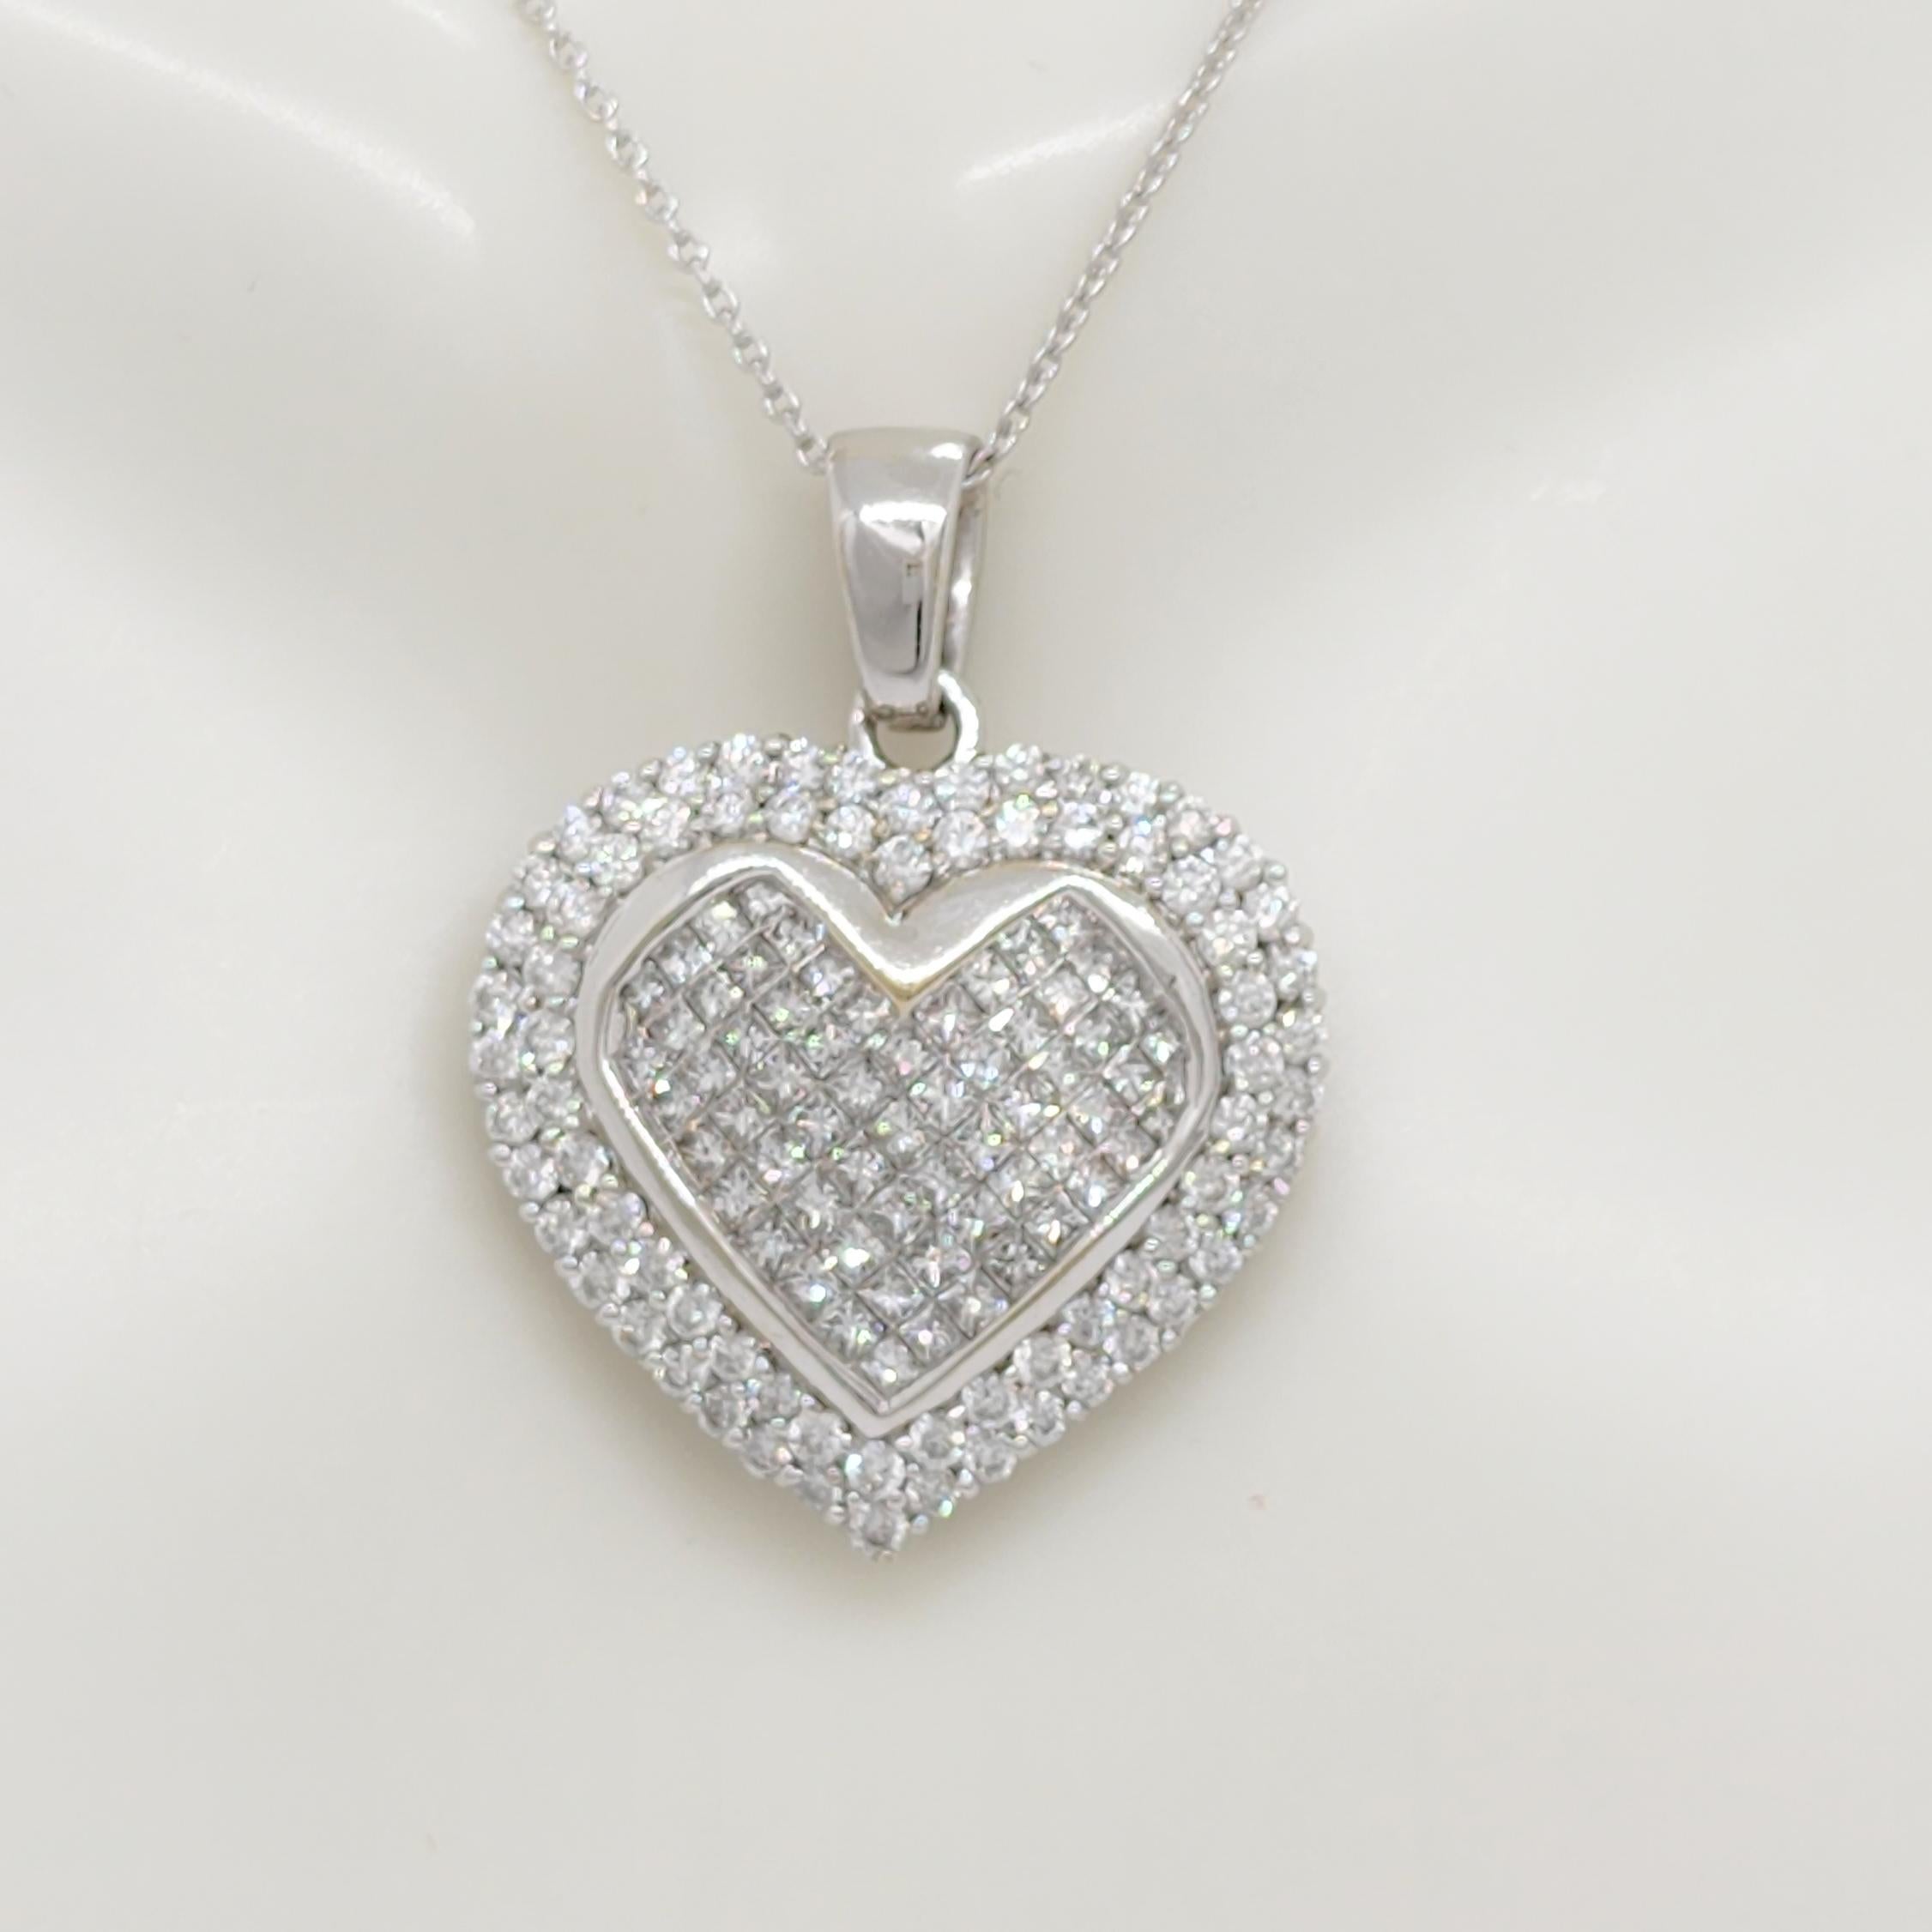 Gorgeous pendant with 3.00 ct. of good quality white diamond squares and rounds.  Handmade in 14k white gold.  Length is 16